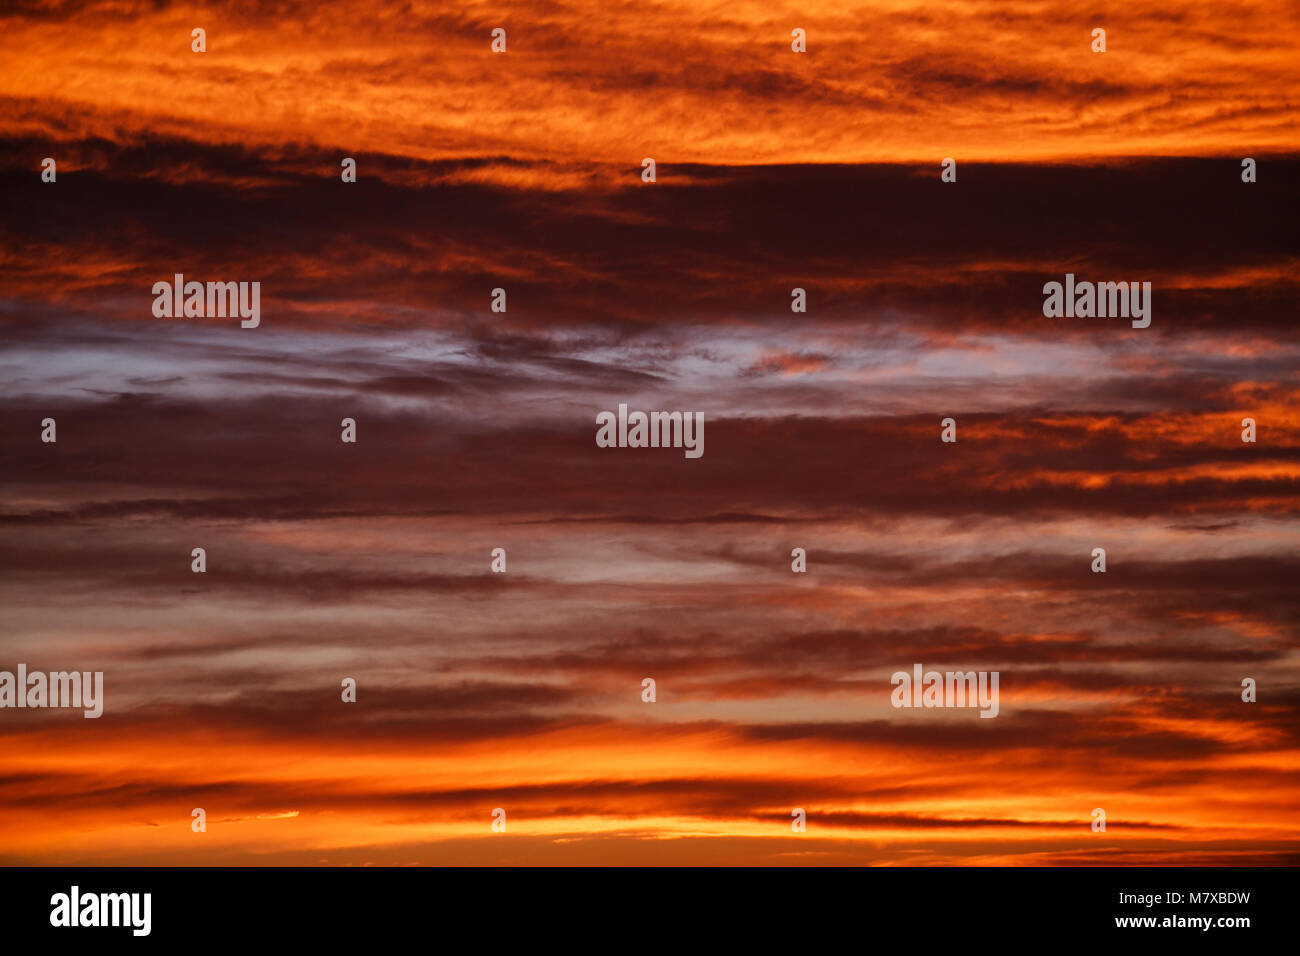 amazing sunset wallpaper. beautiful red sunset and clouds in orange sky, dramatic view. fascinating image. beautiful nature moments, breathtaking scen Stock Photo